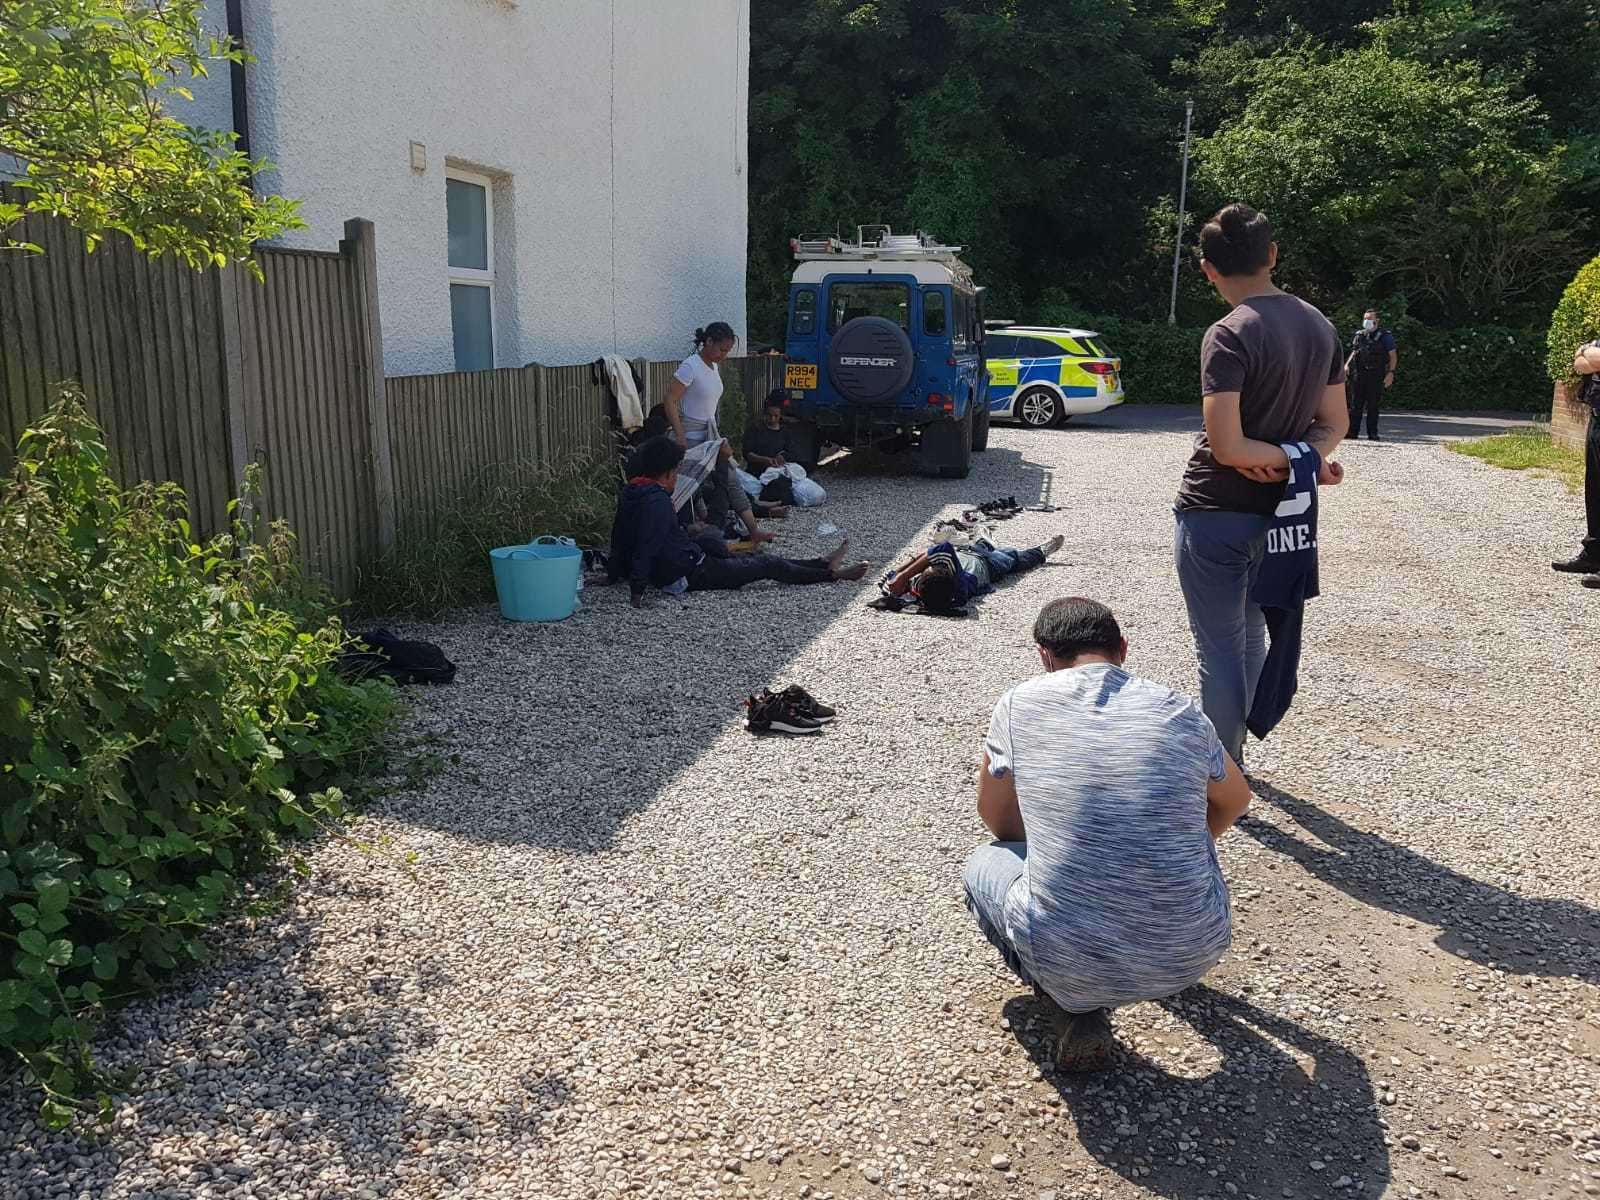 Police caught up with the asylum seekers in North Road, Kingsdown. Picture: Kathryn Hewitt